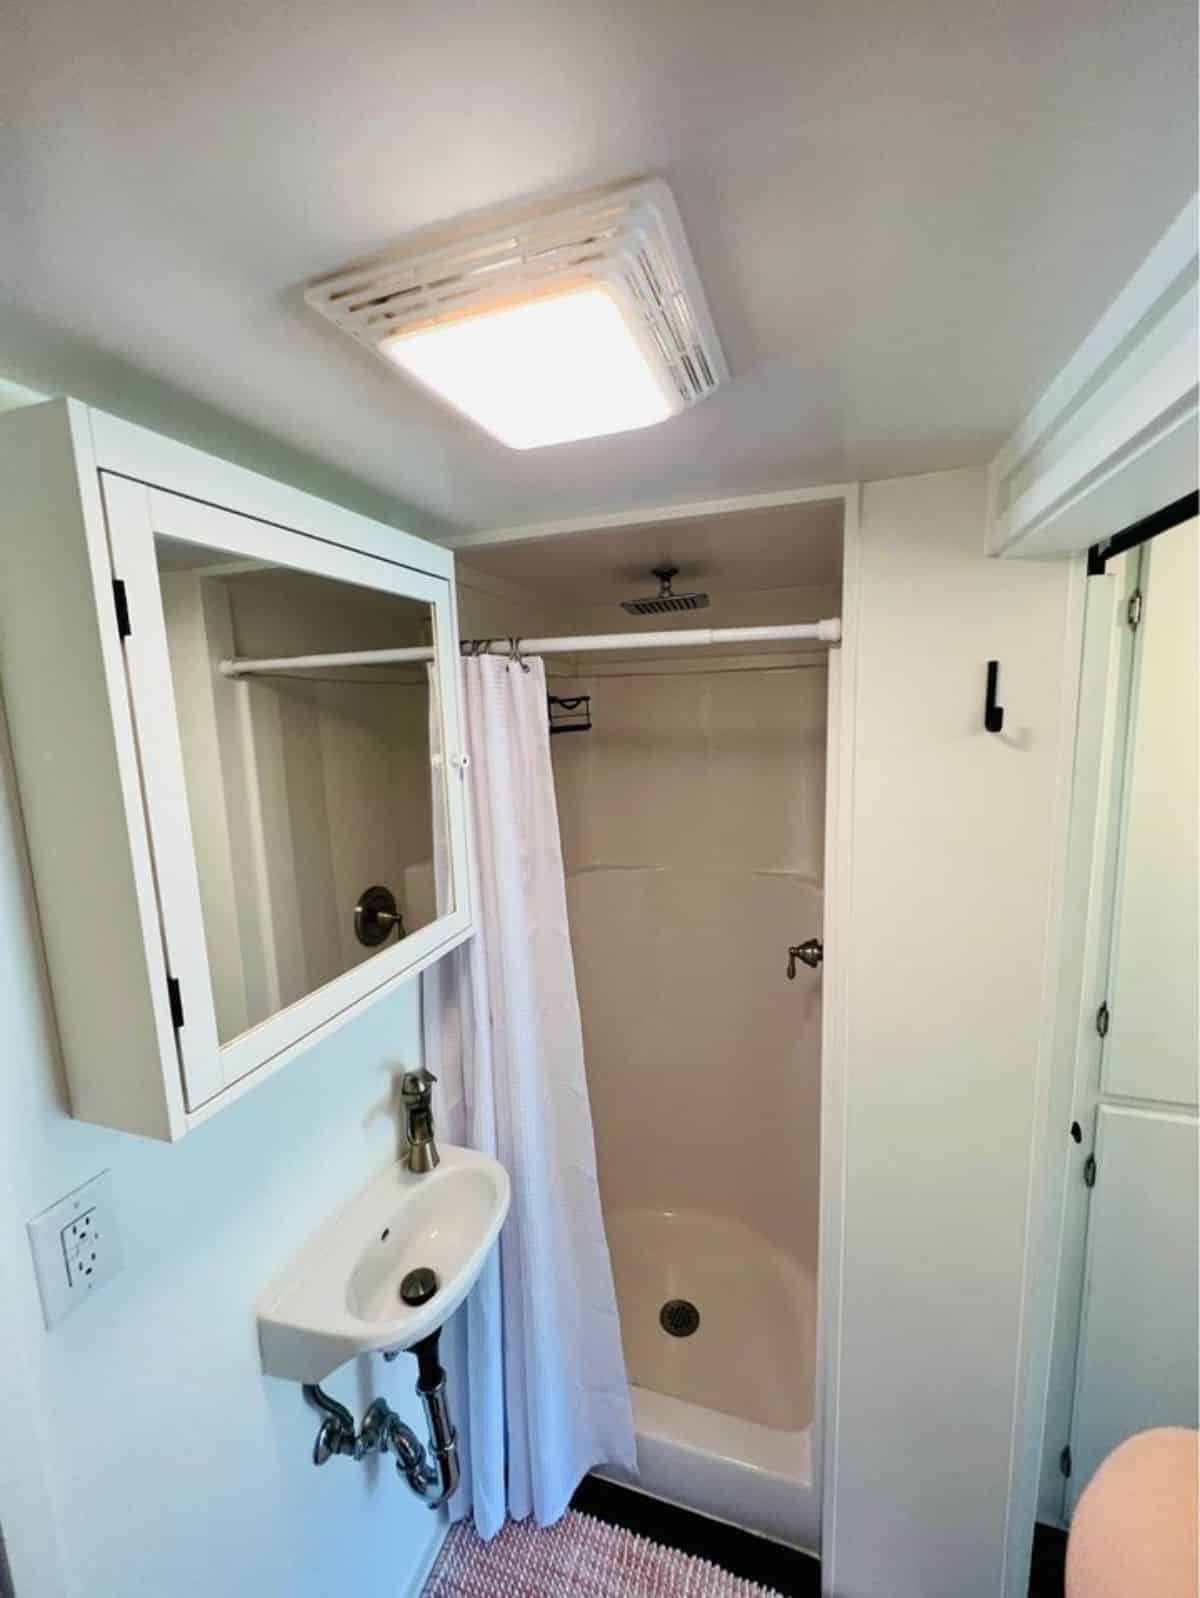 Separate shower area in bathroom of 20’ Furnished Tiny Home